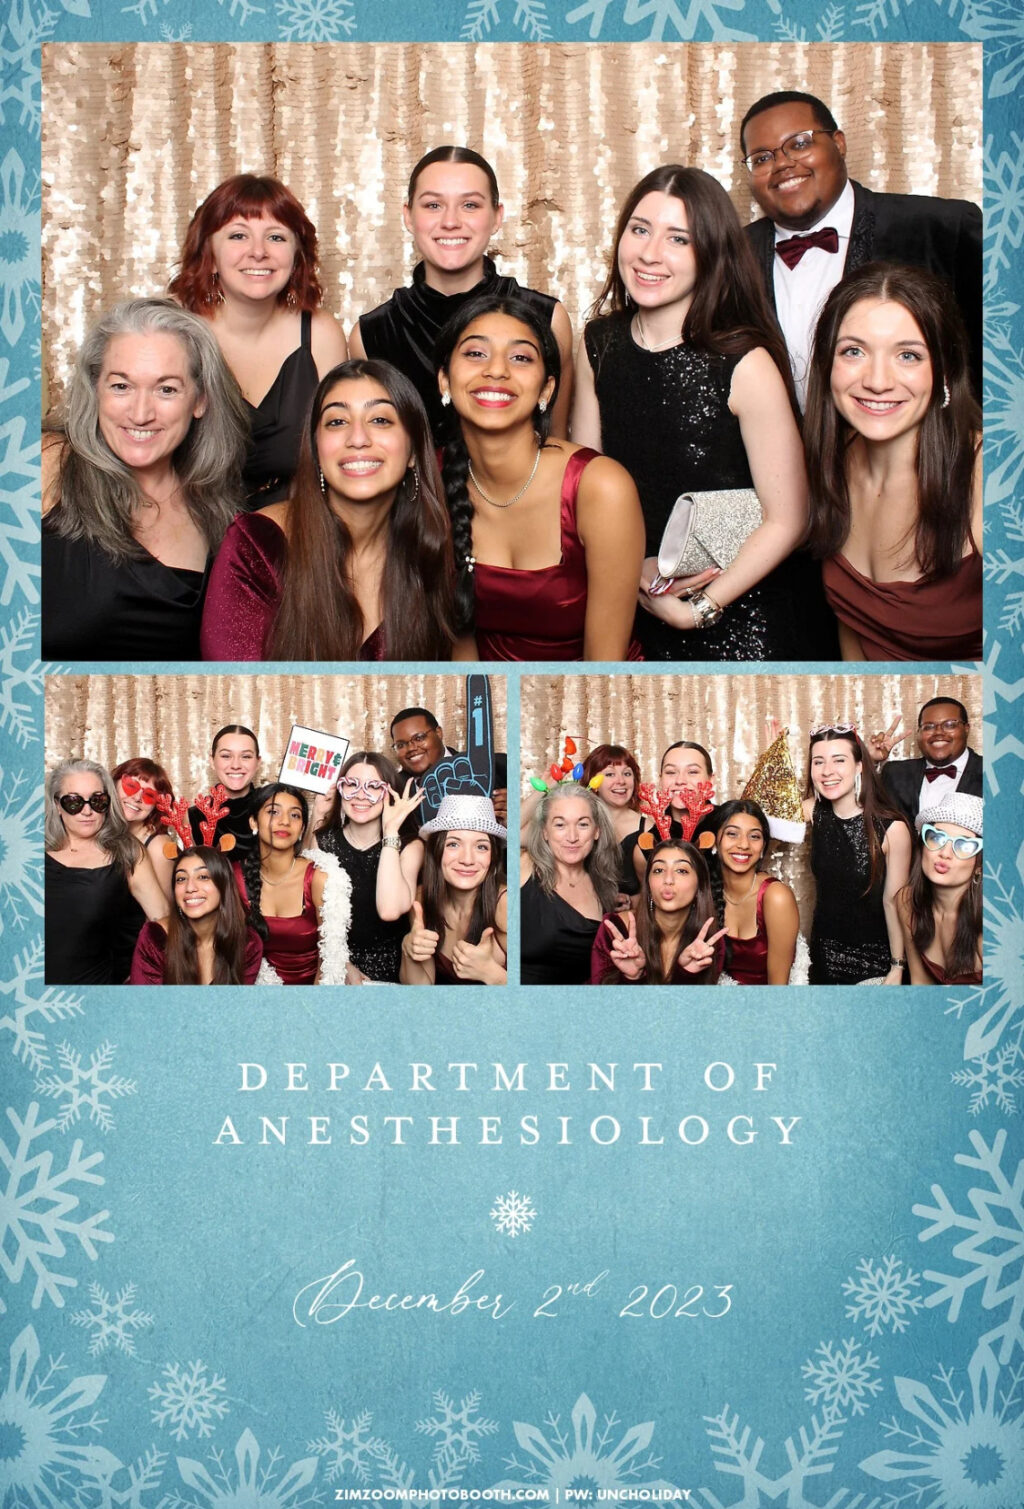 Photo of Lab members taken at the annual anesthesiology Christmas party